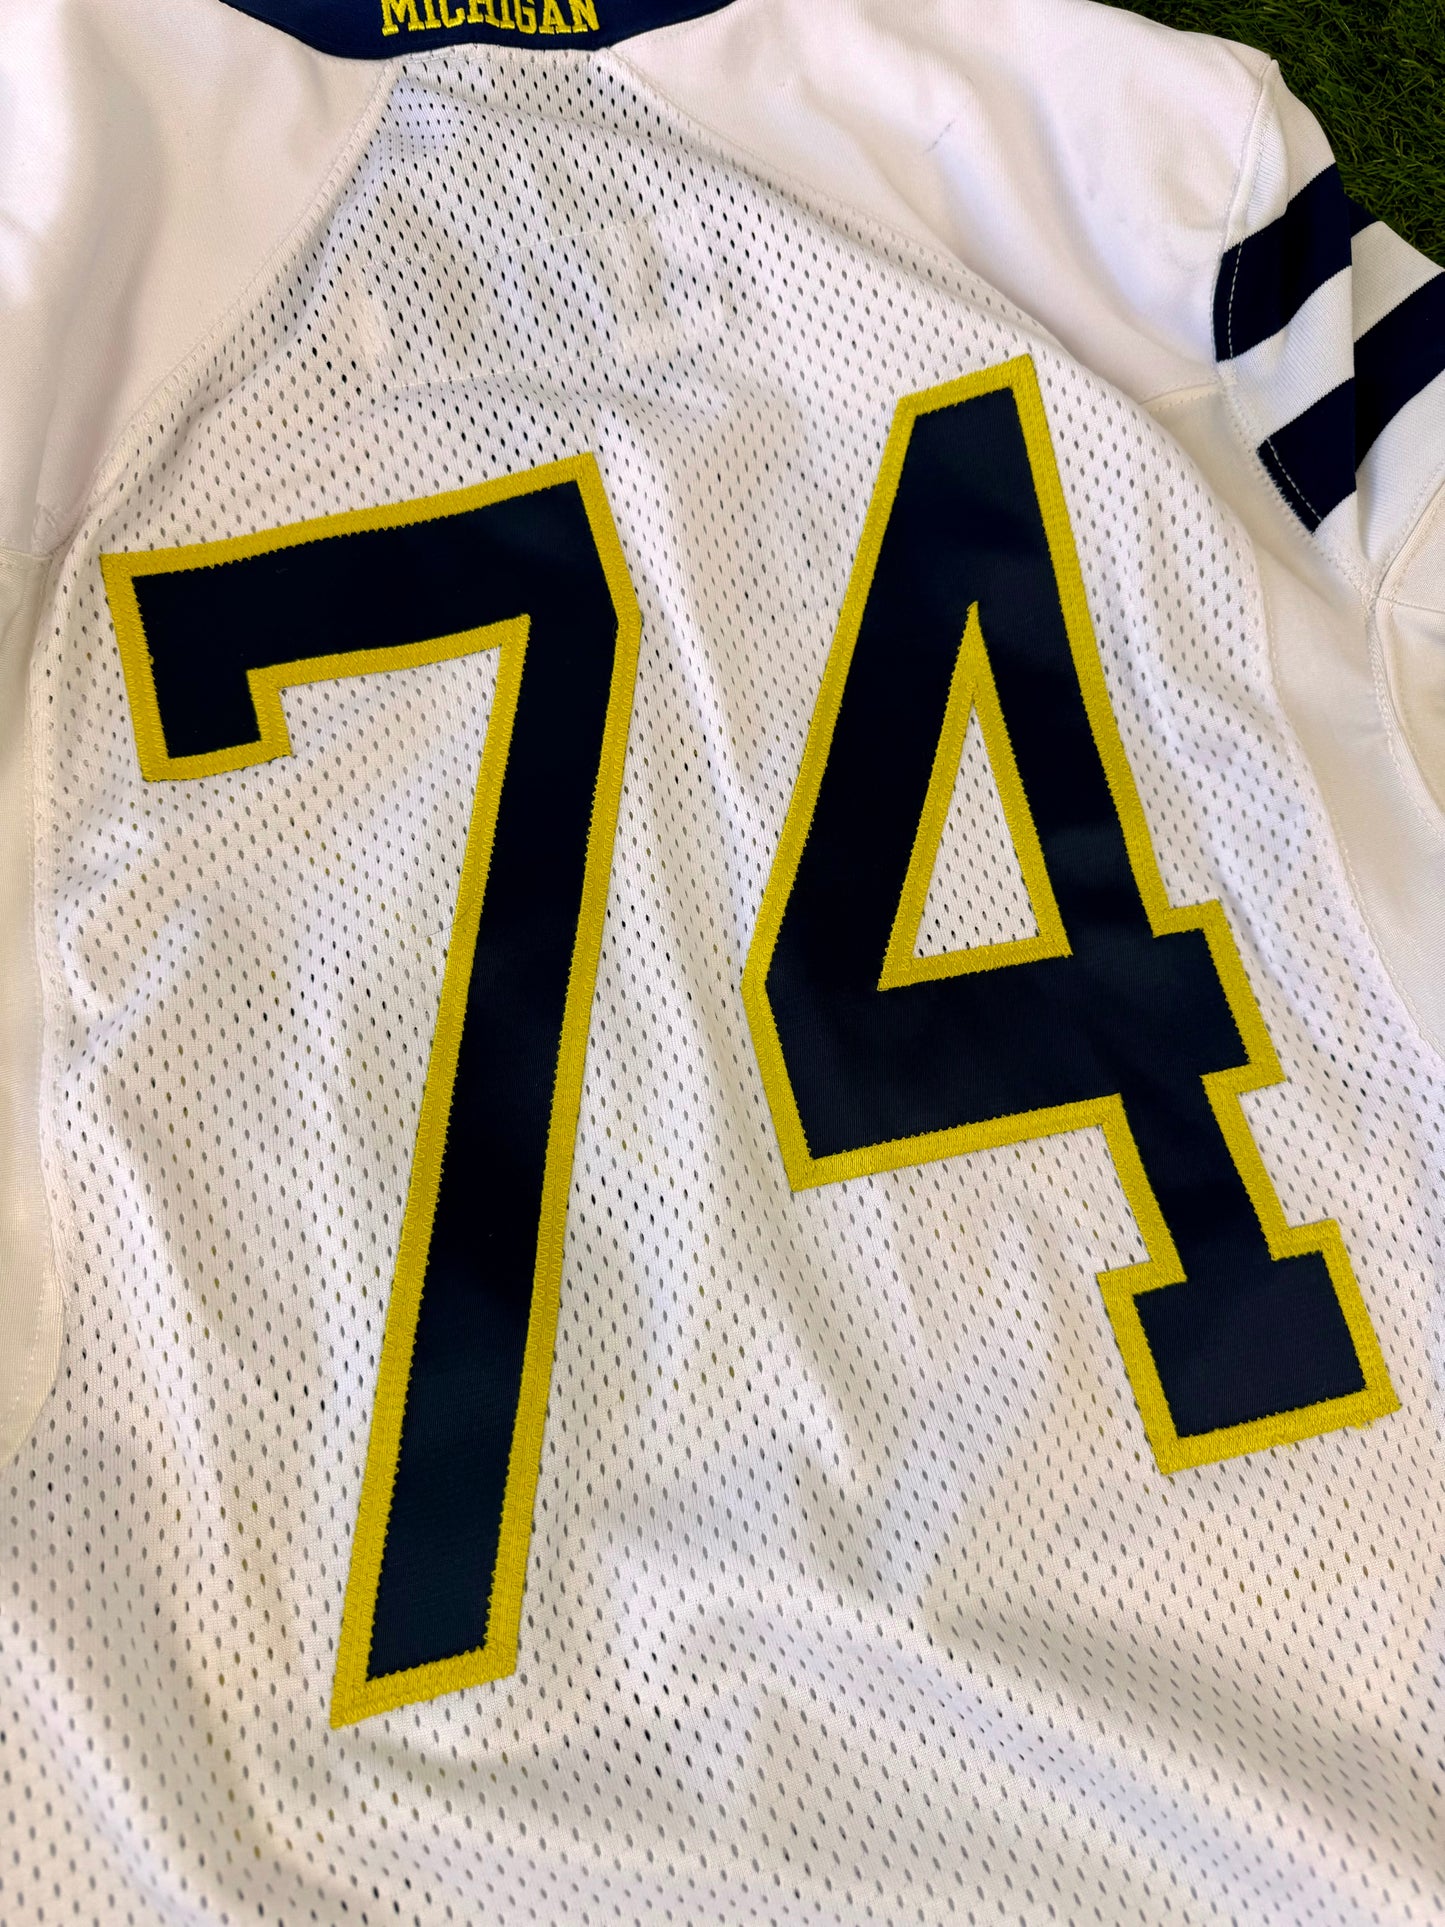 Michigan Wolverines 2012 Sugar Bowl Game Issued Jersey (44/Large)